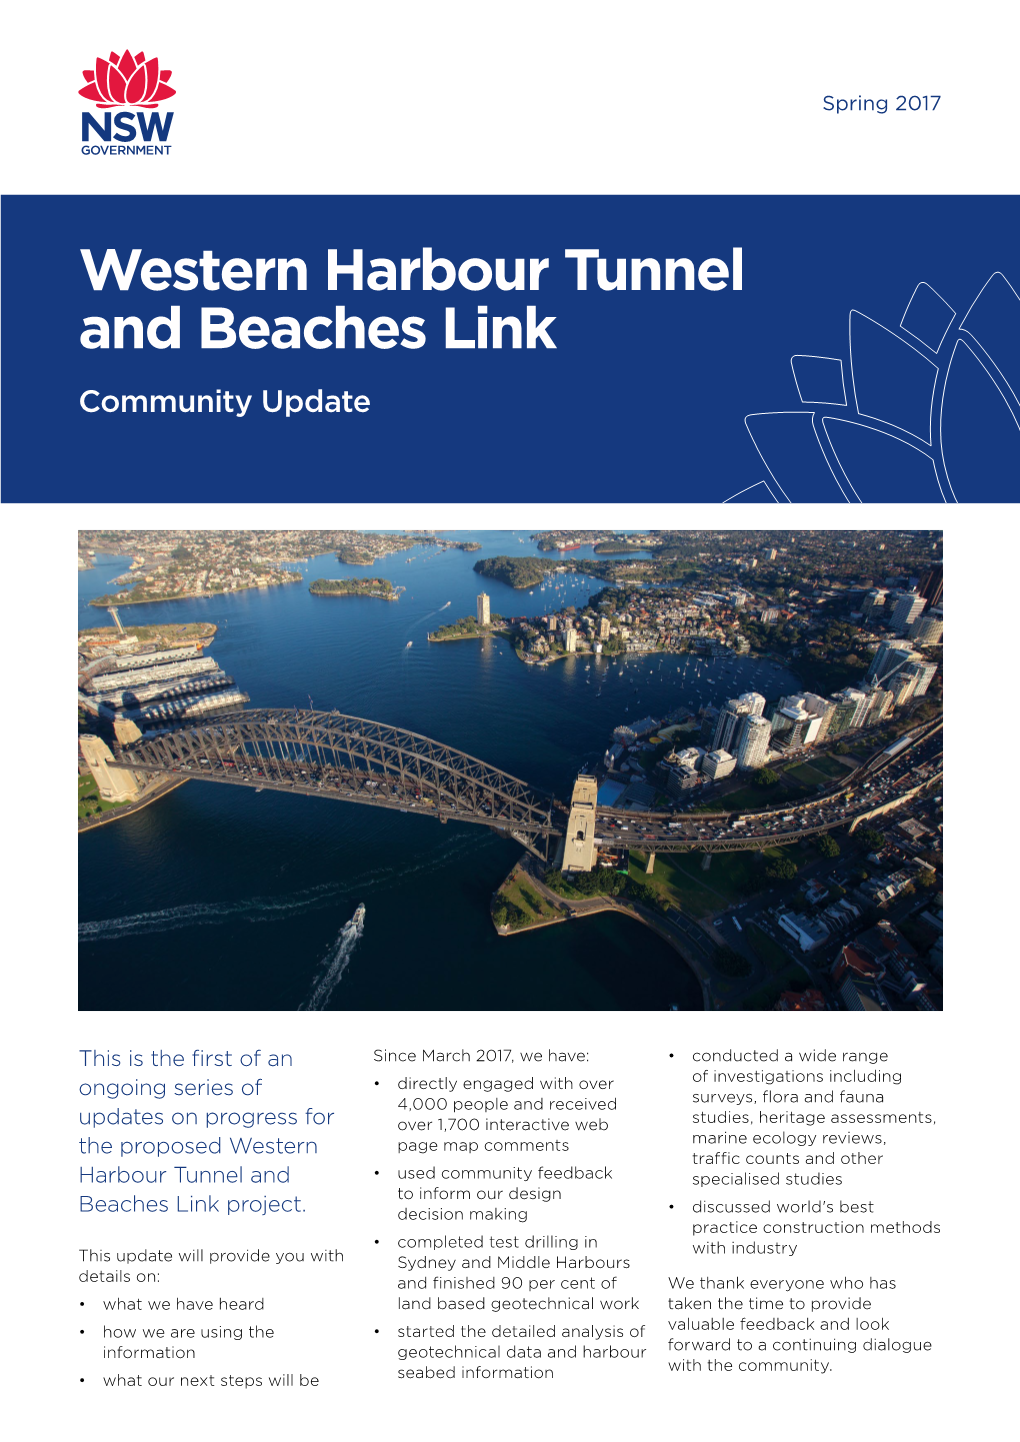 Western Harbour Tunnel and Beaches Link – Community Update